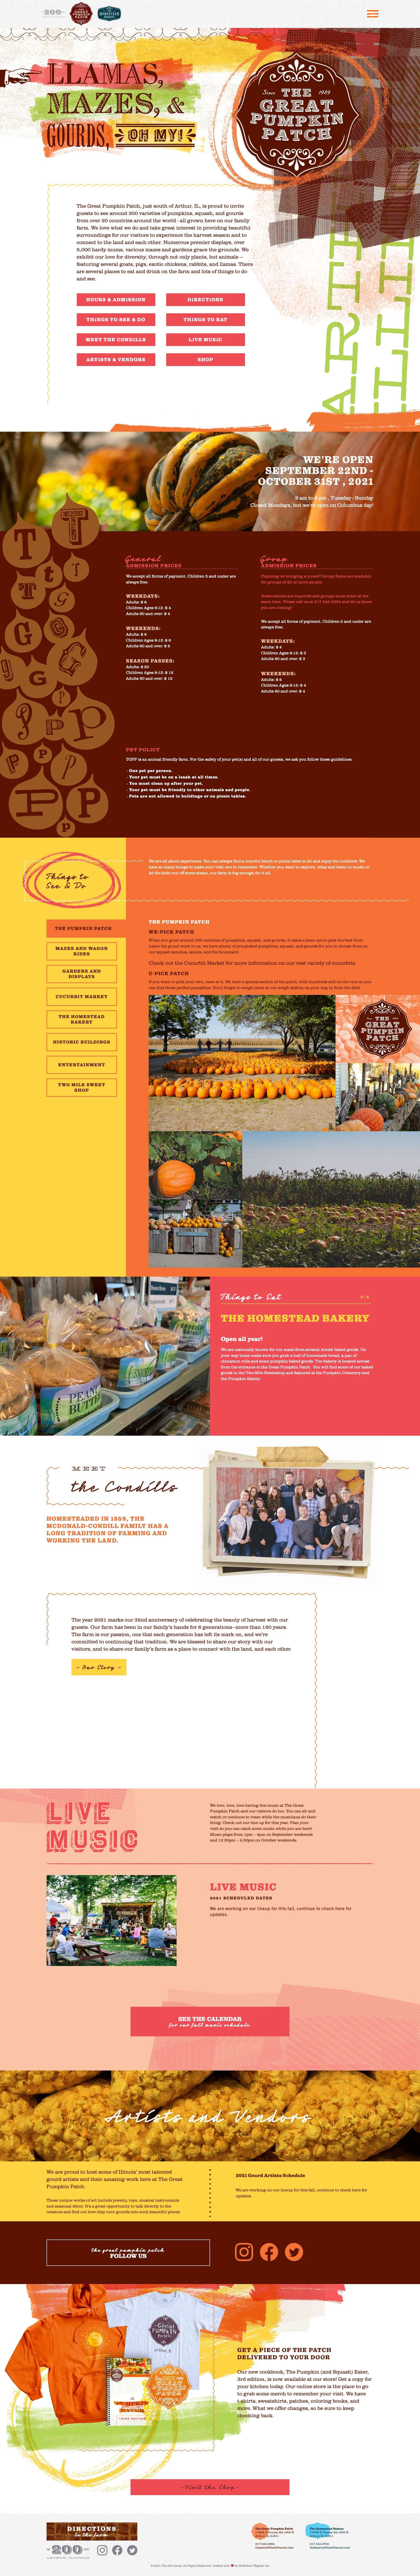 The 200 Acres - The Great Pumpkin Patch - The Homestead Bakery Website